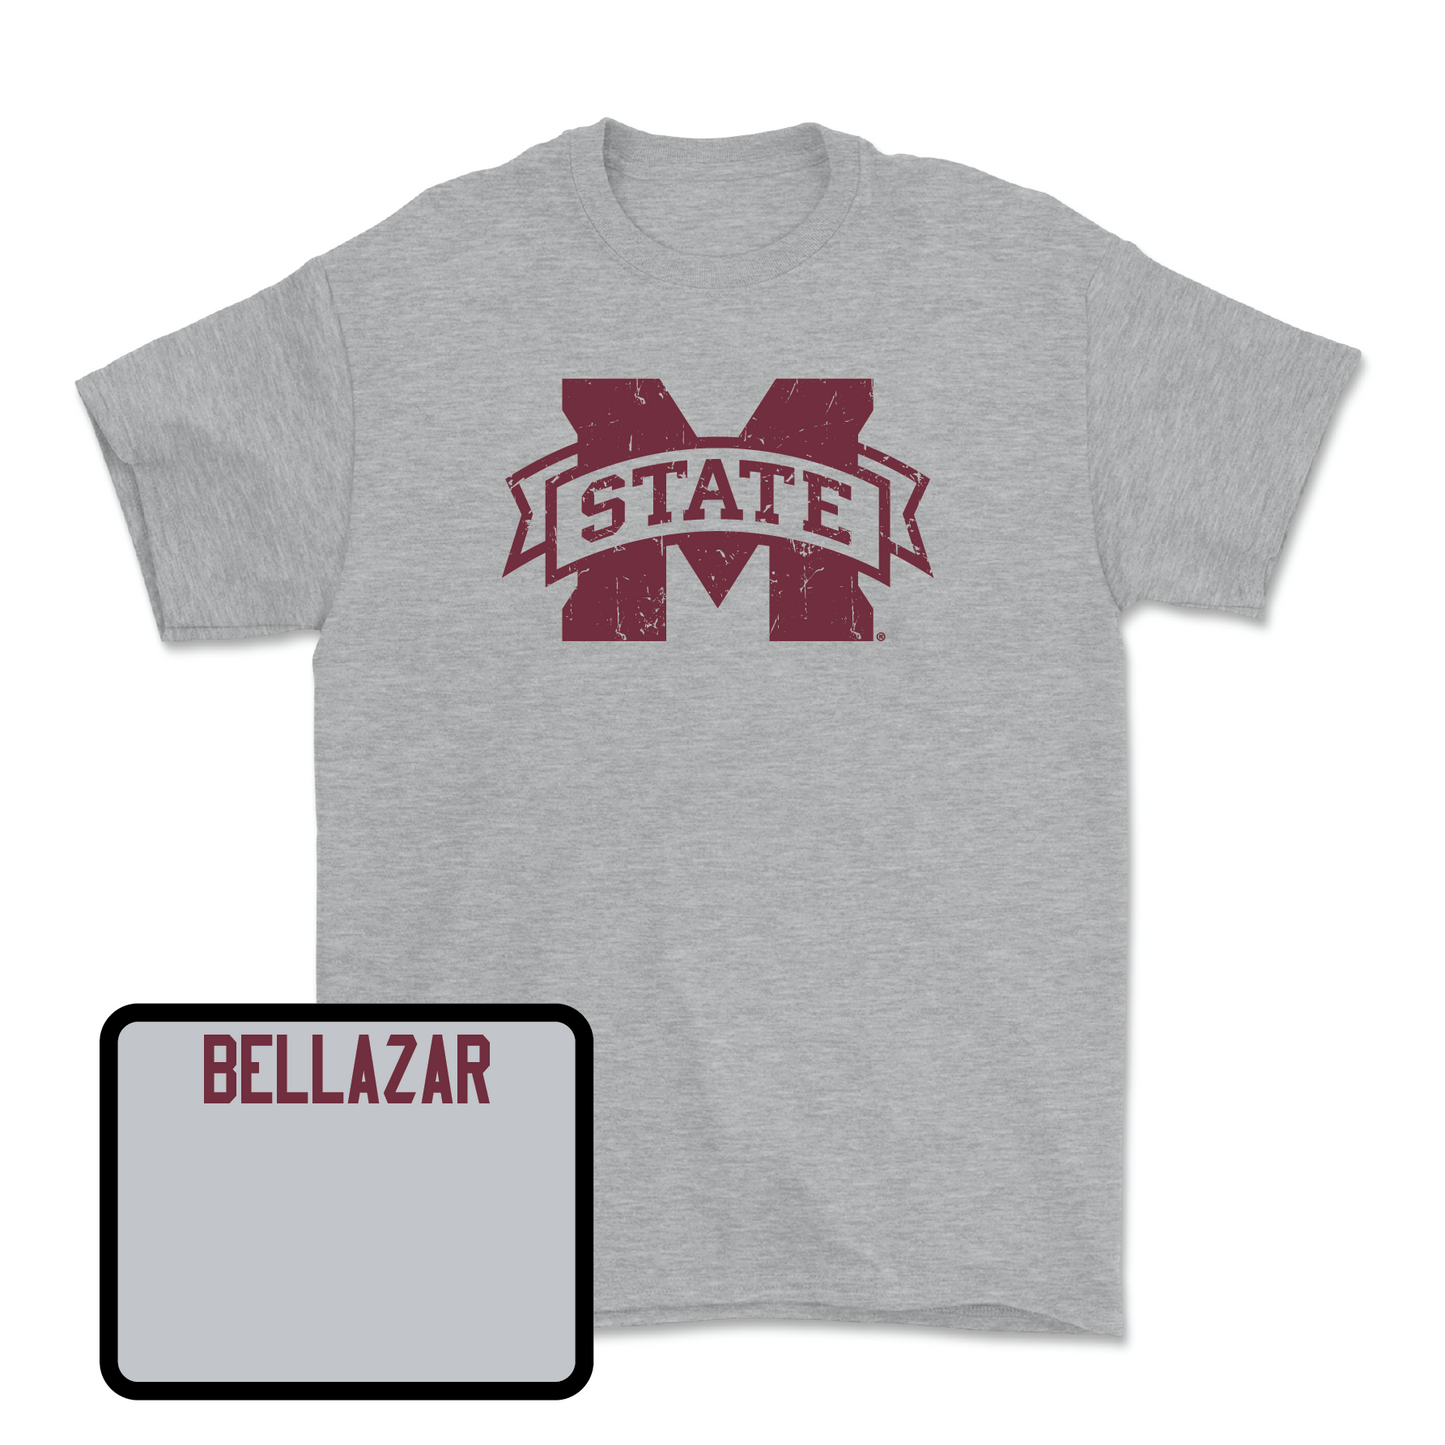 Sport Grey Football Classic Tee 2X-Large / Jacoby Bellazar | #